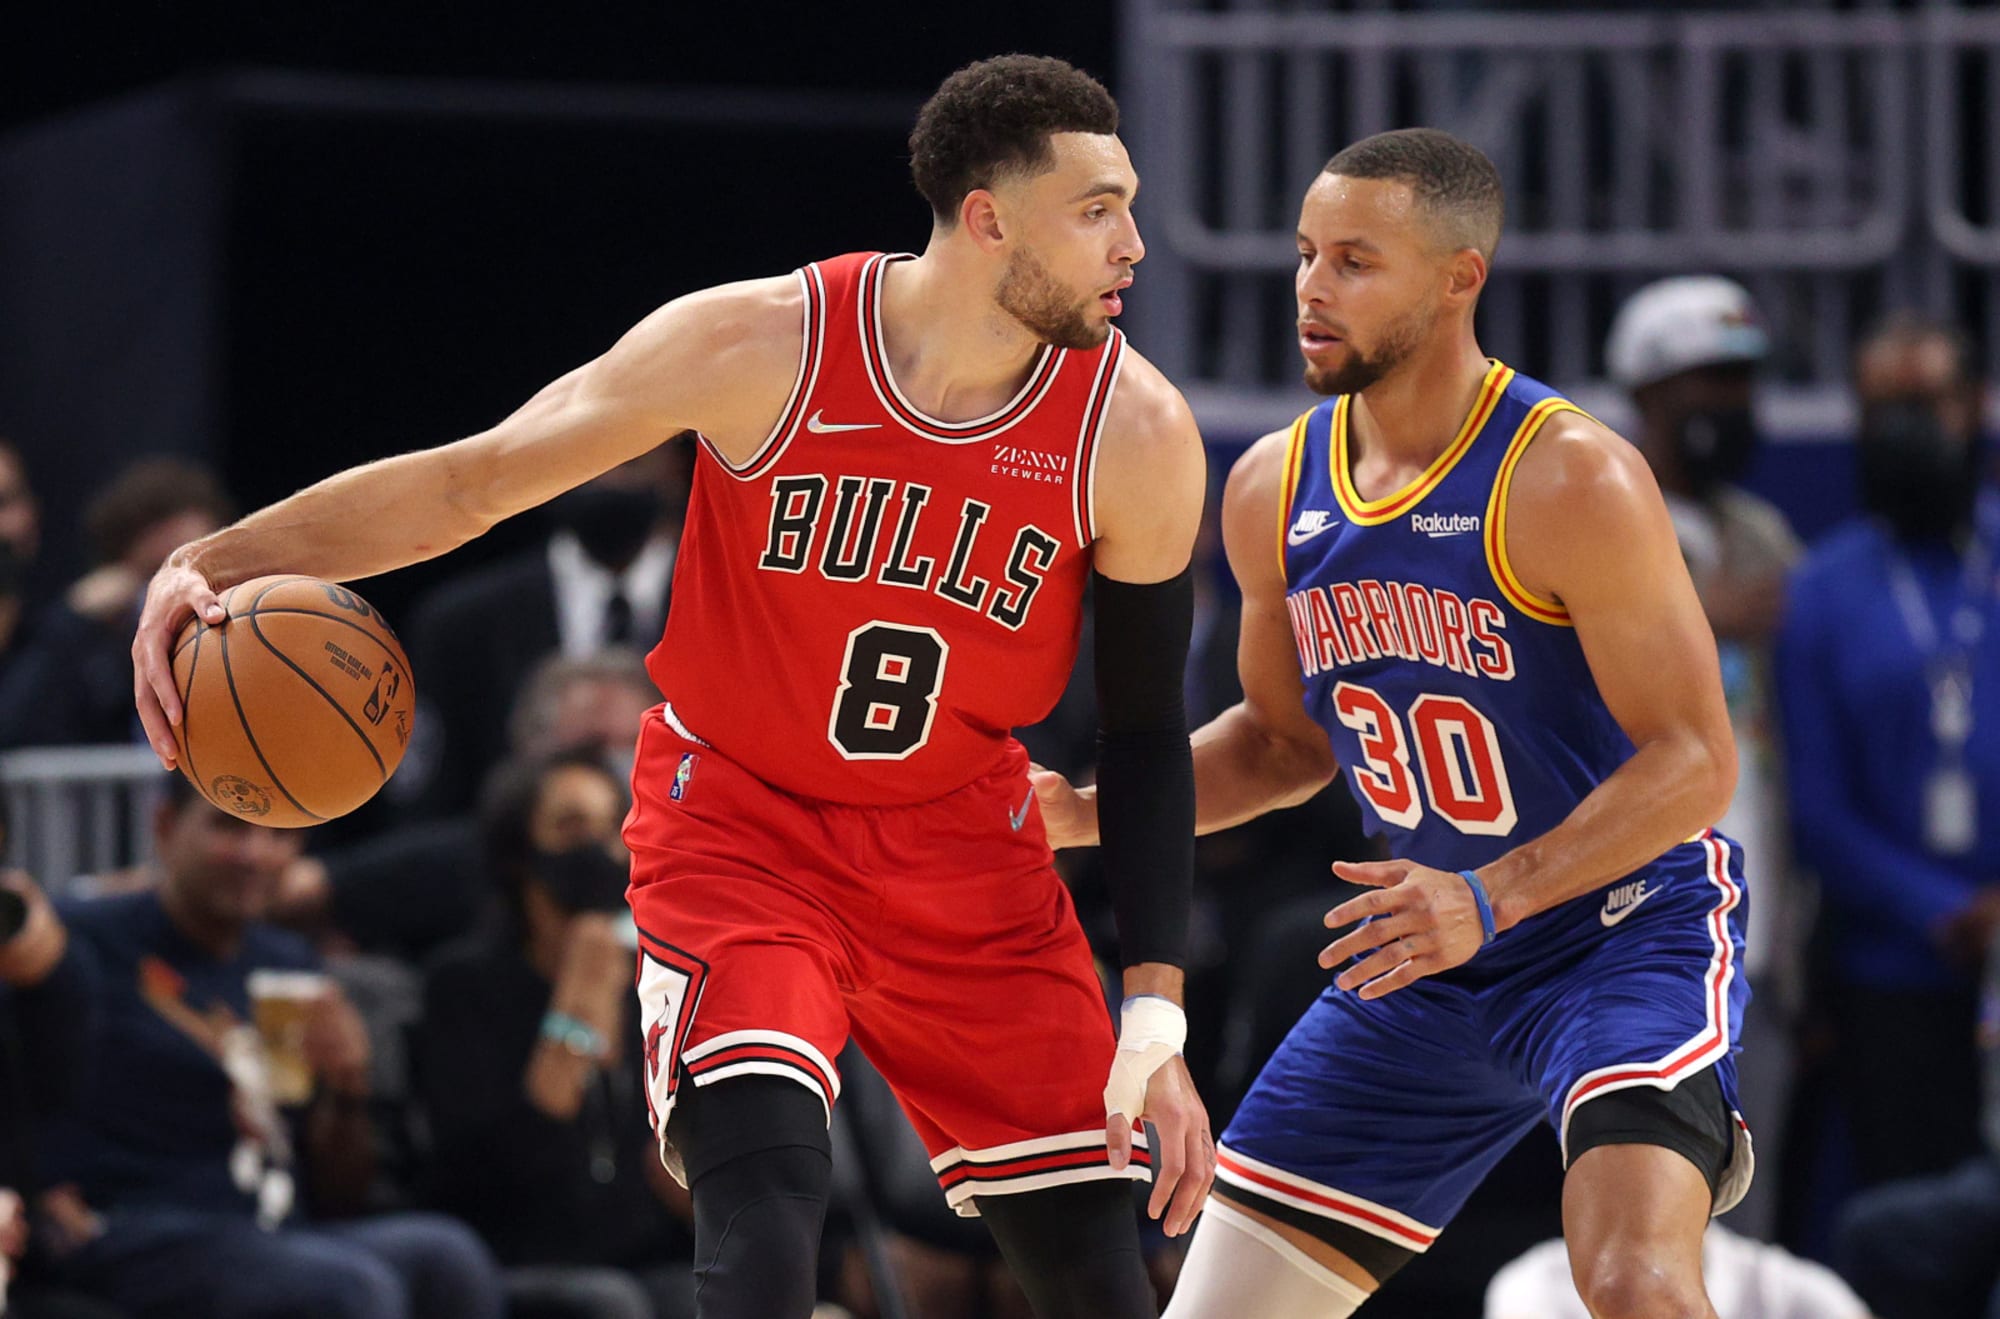 Bulls vs Warriors Odds, Starting Lineup, Injury Report, Predictions, TV Channel for Dec